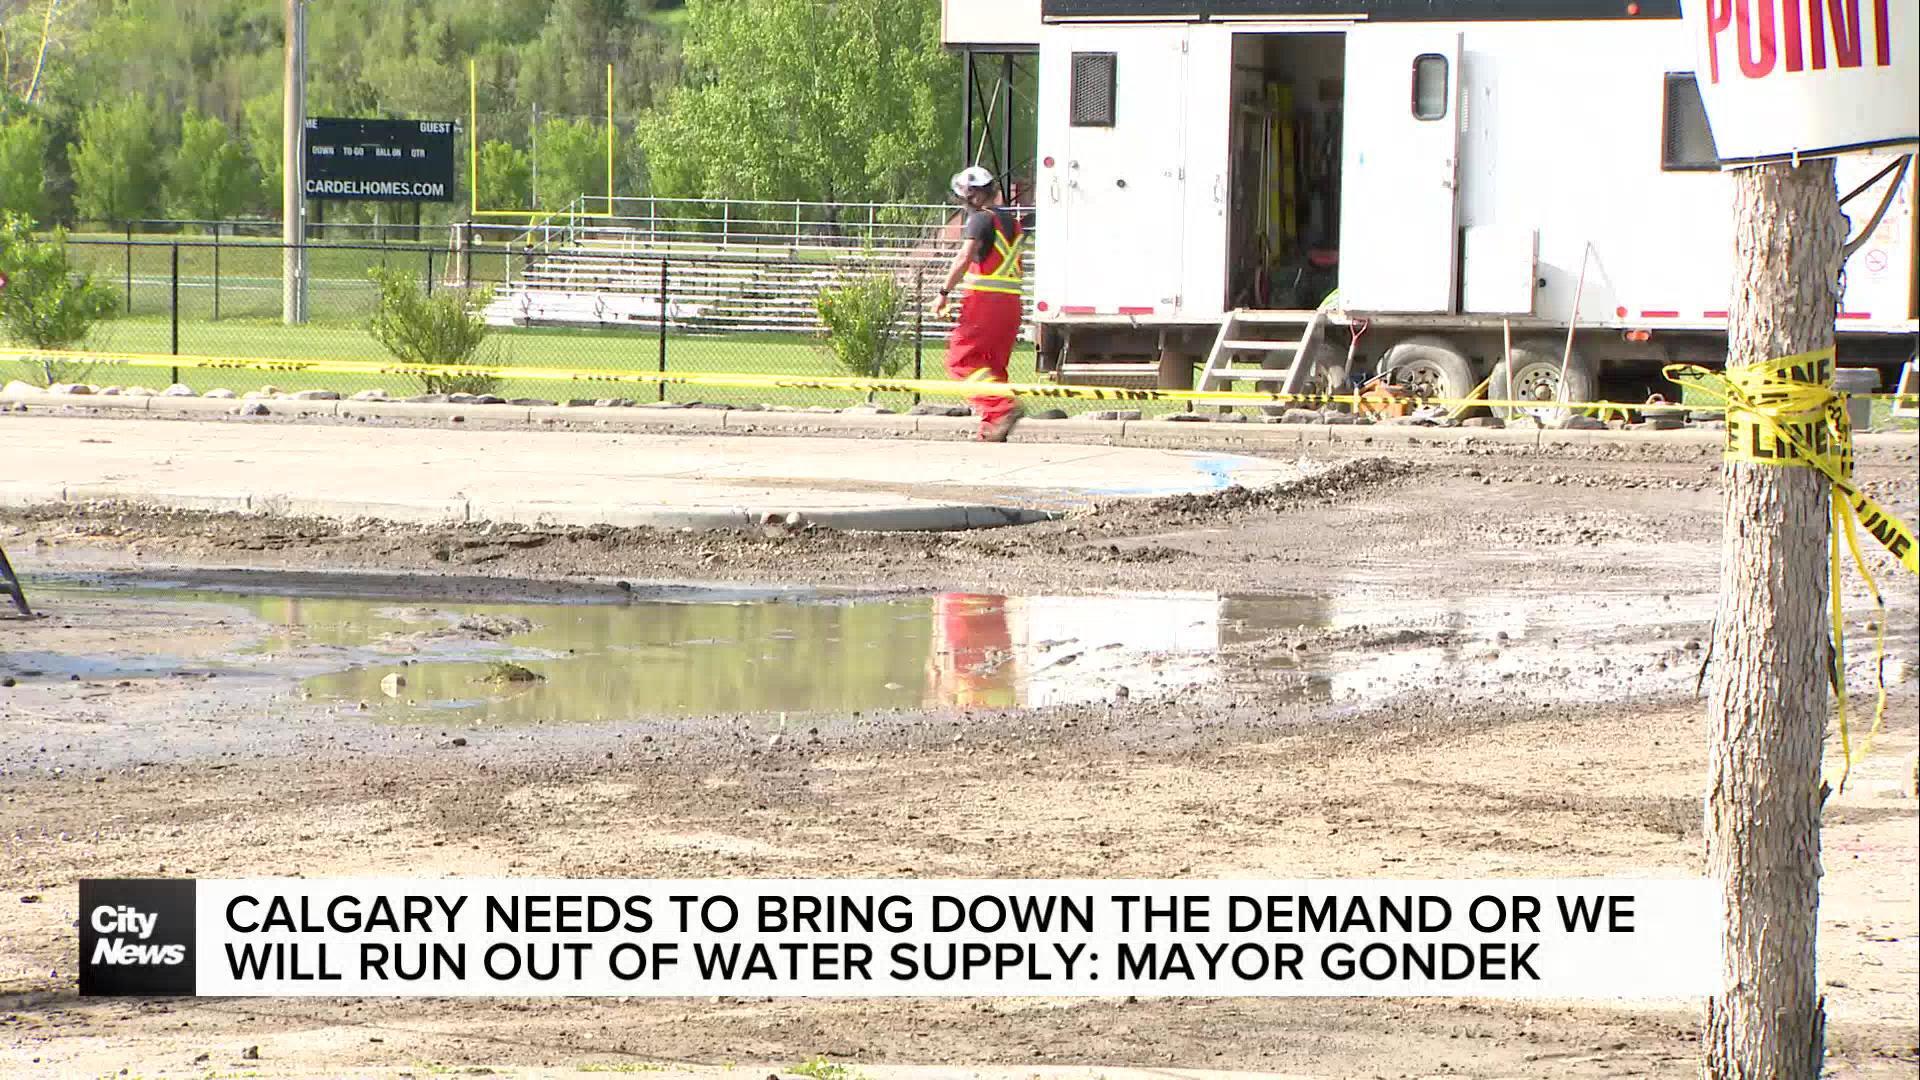 The City urging Calgarians to continue conserving water